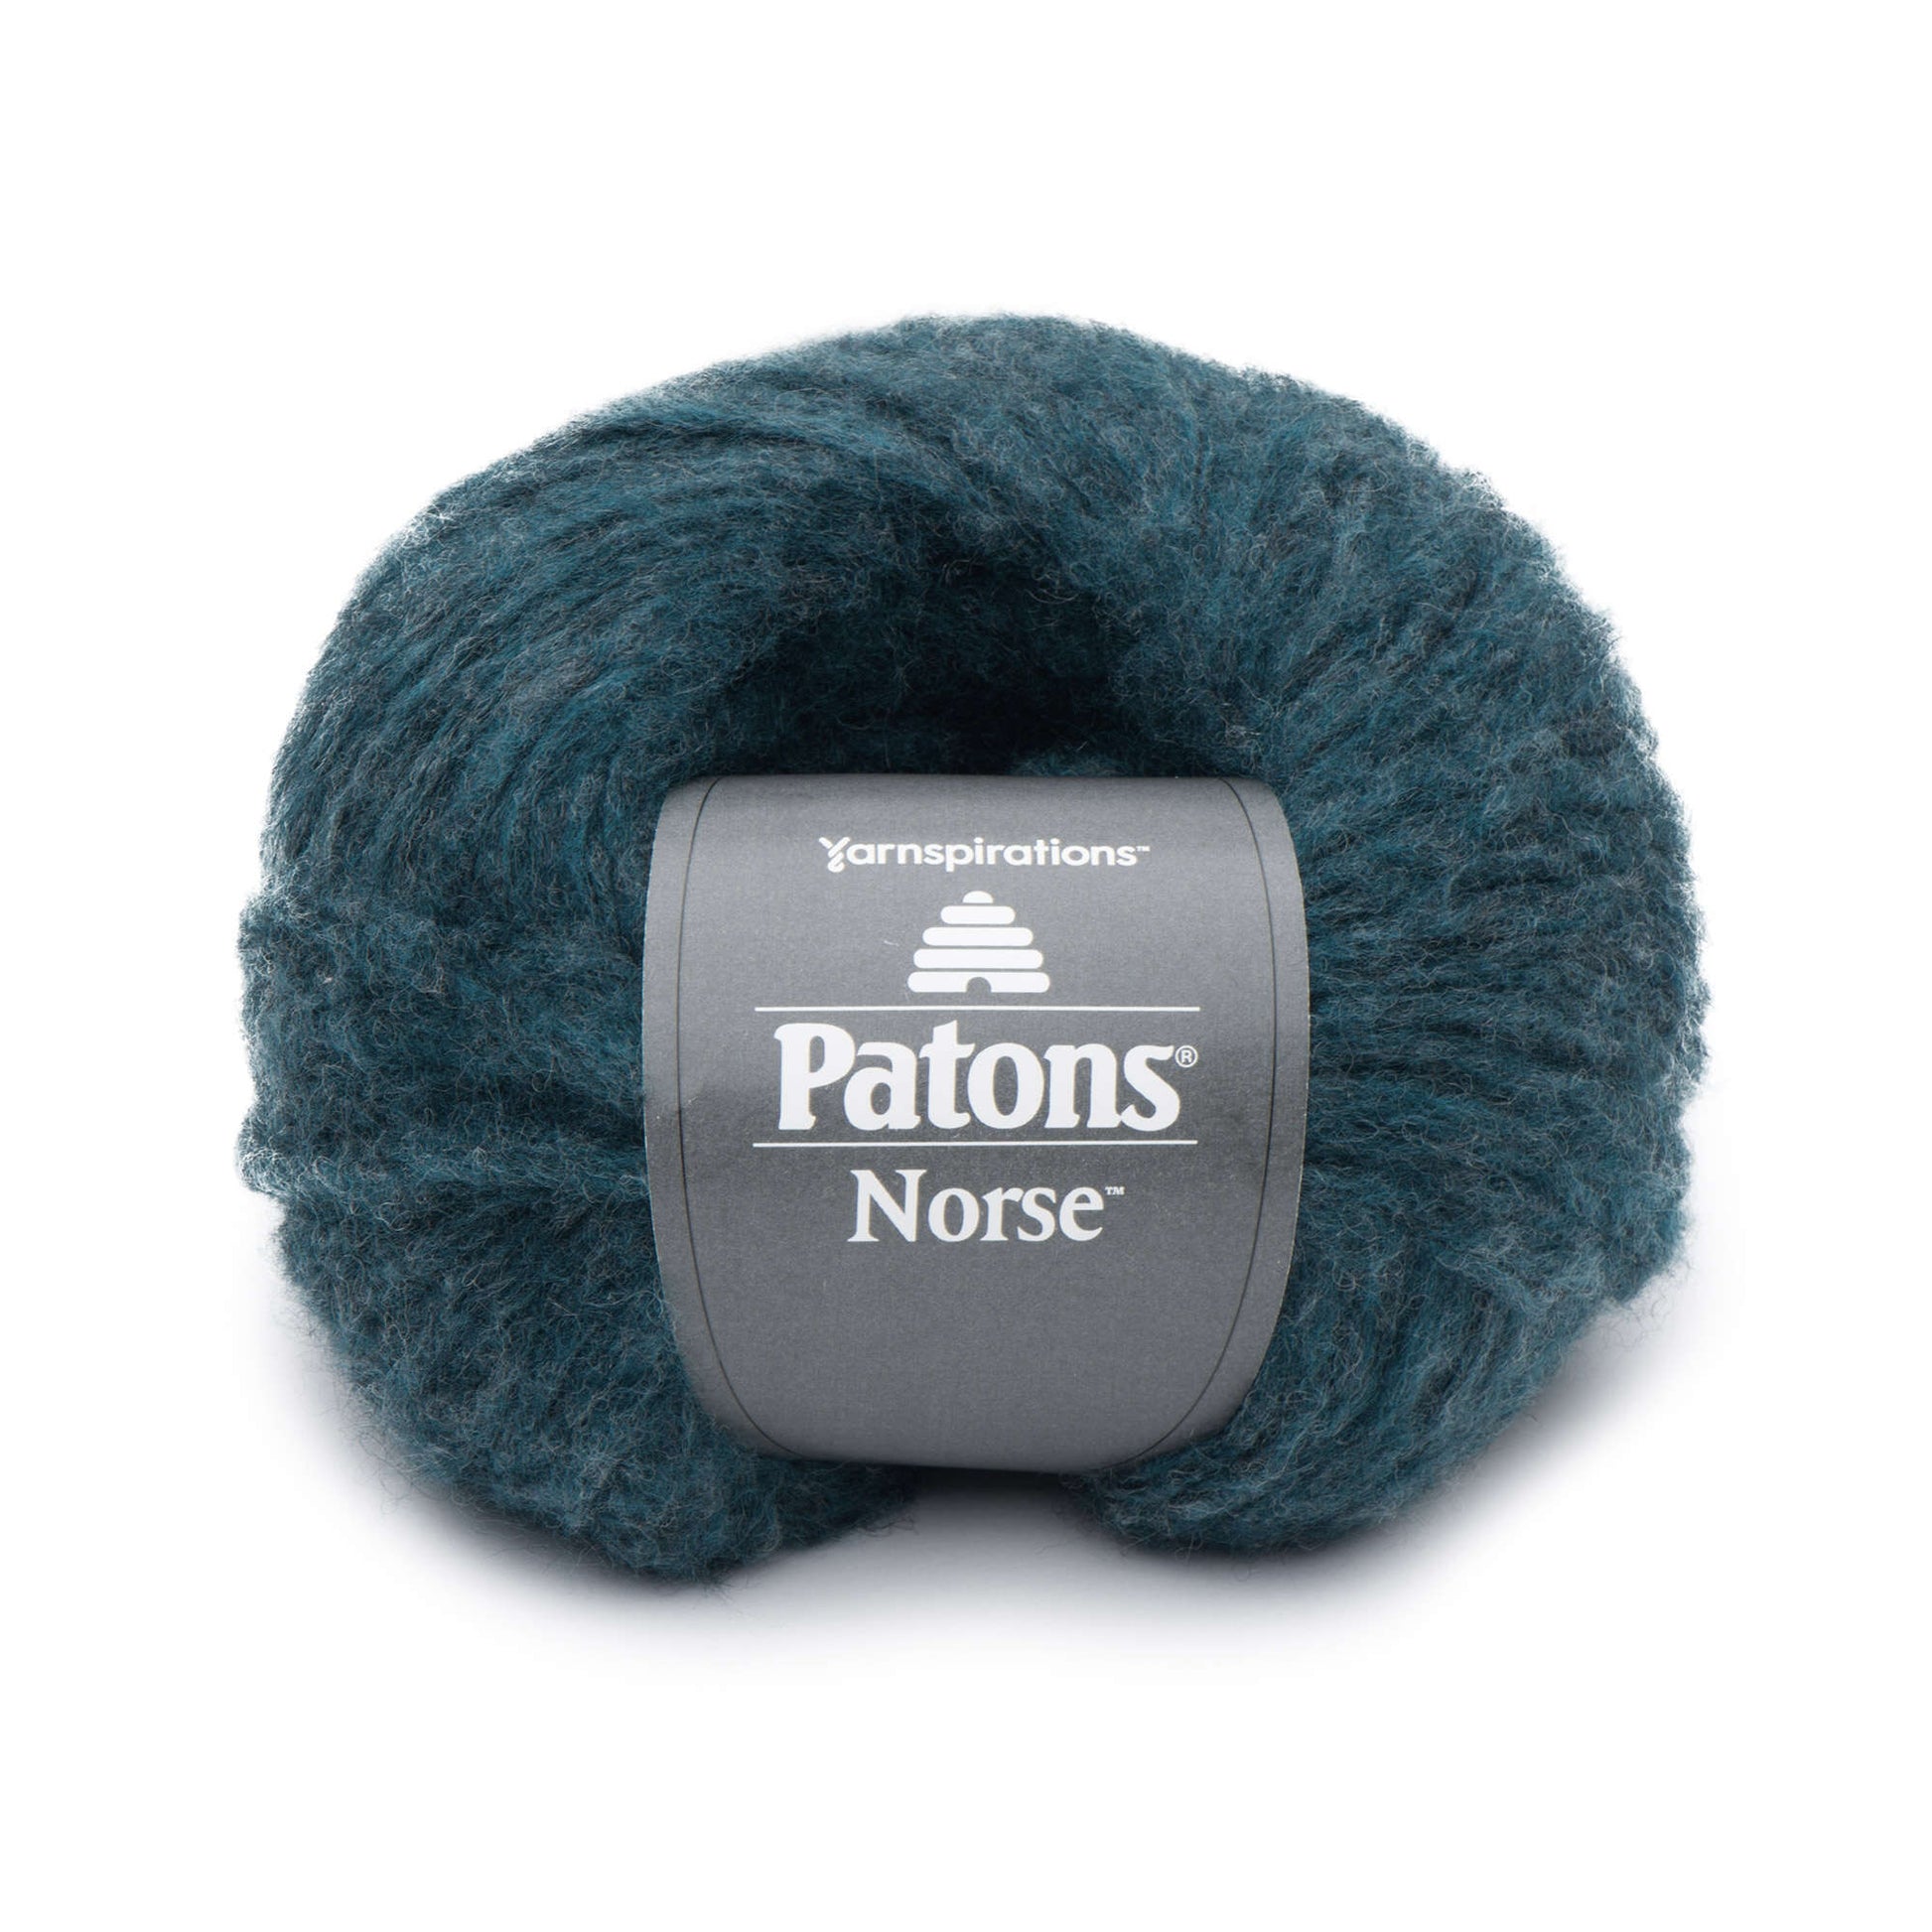 Patons Norse Yarn - Clearance shades Teal Blue